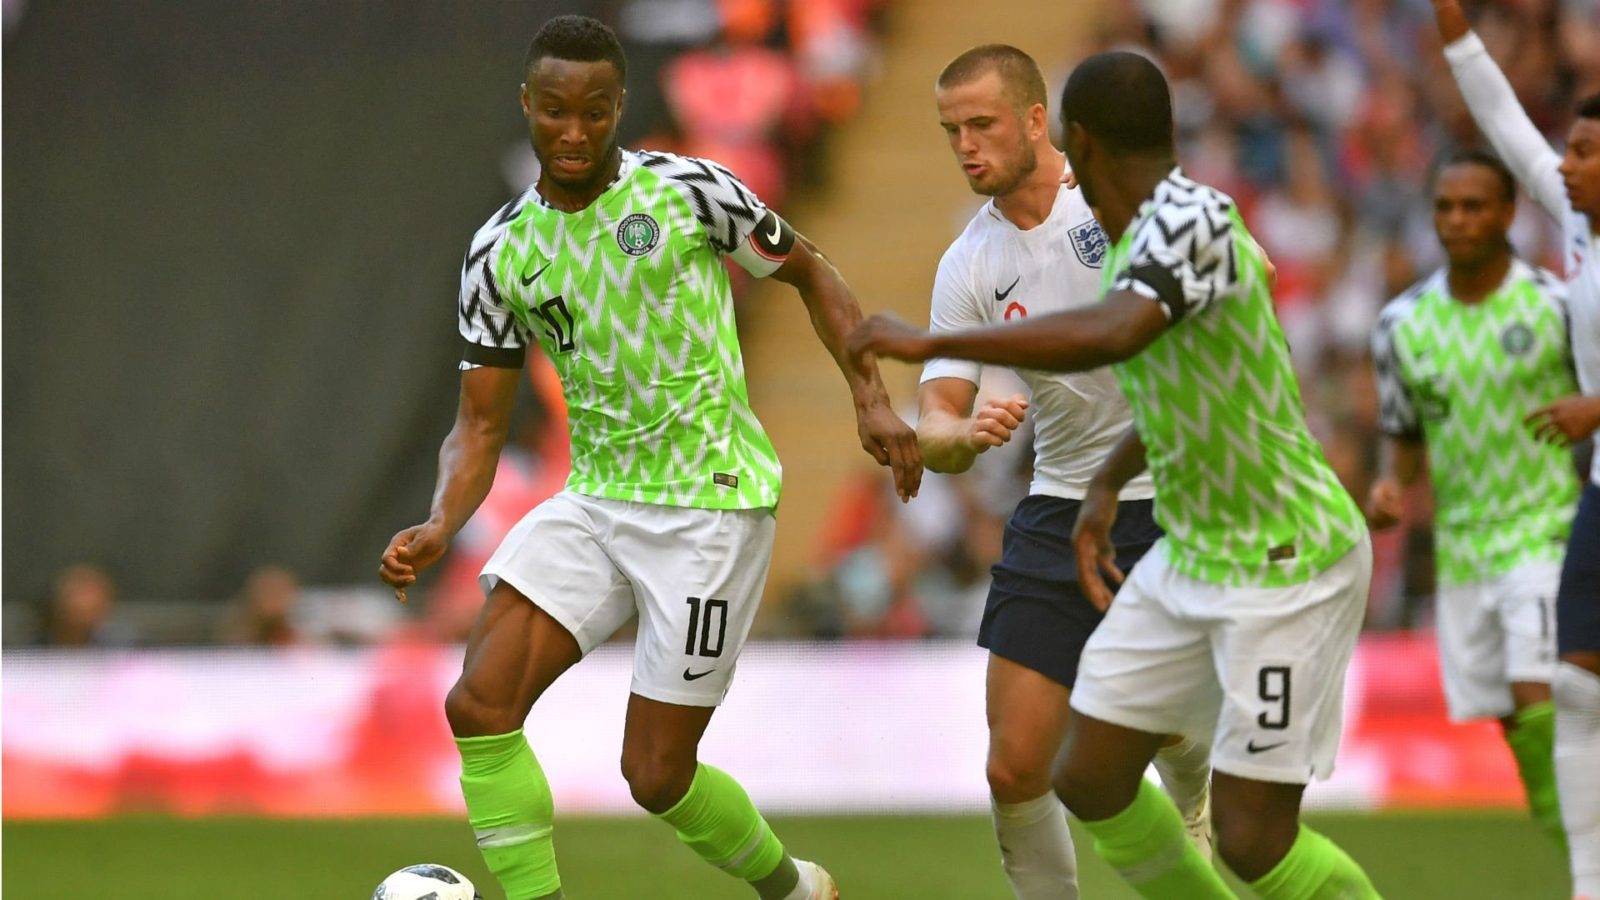 Nigeria's Super Eagles captain Mikel John in action during the team's friendly match with England at the Wembley stadium on Saturday.